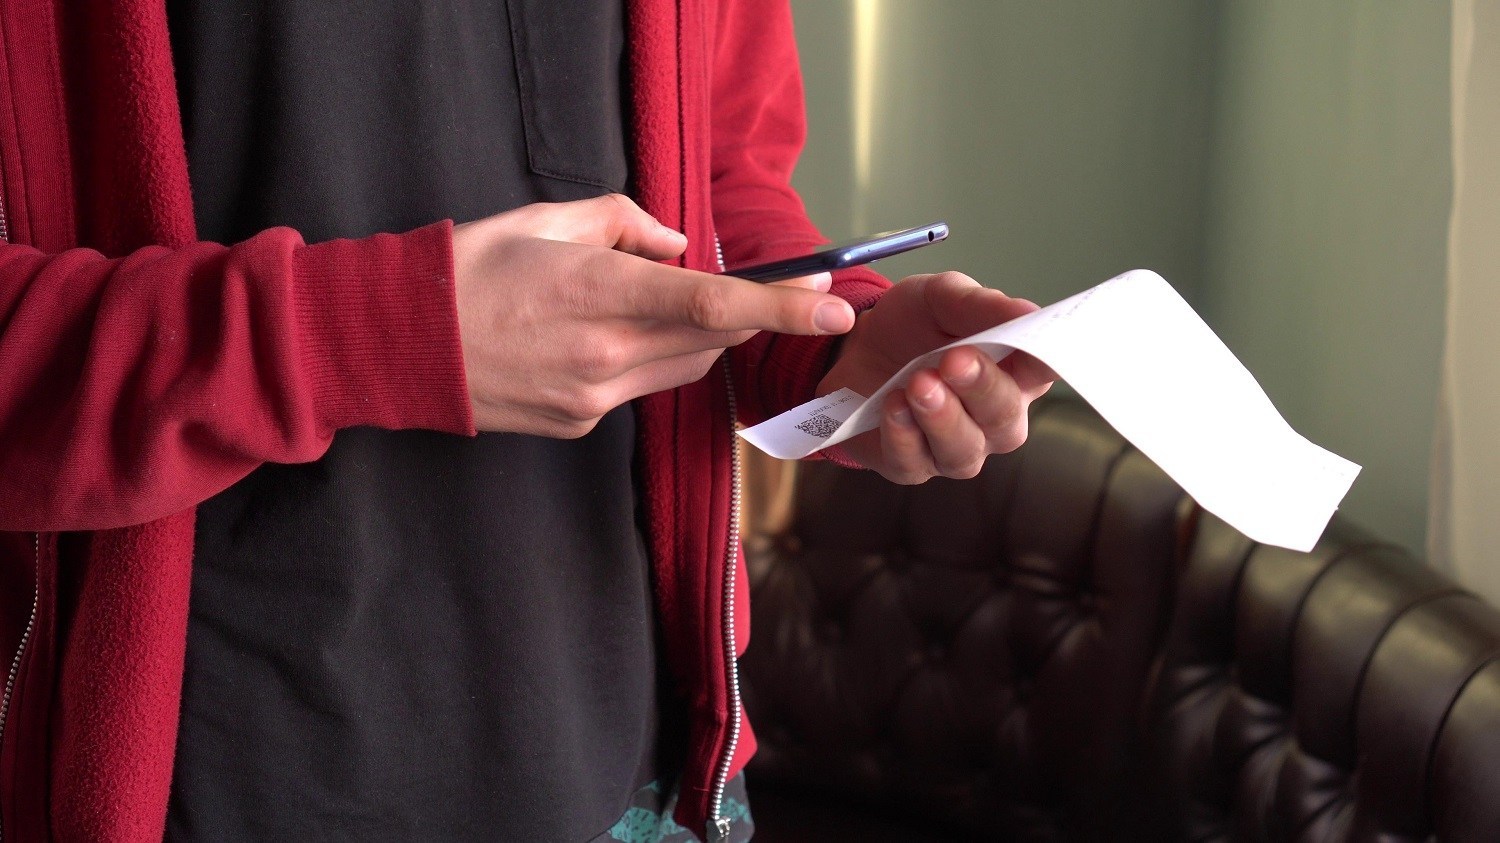 man scanning a receipt with a smartphone